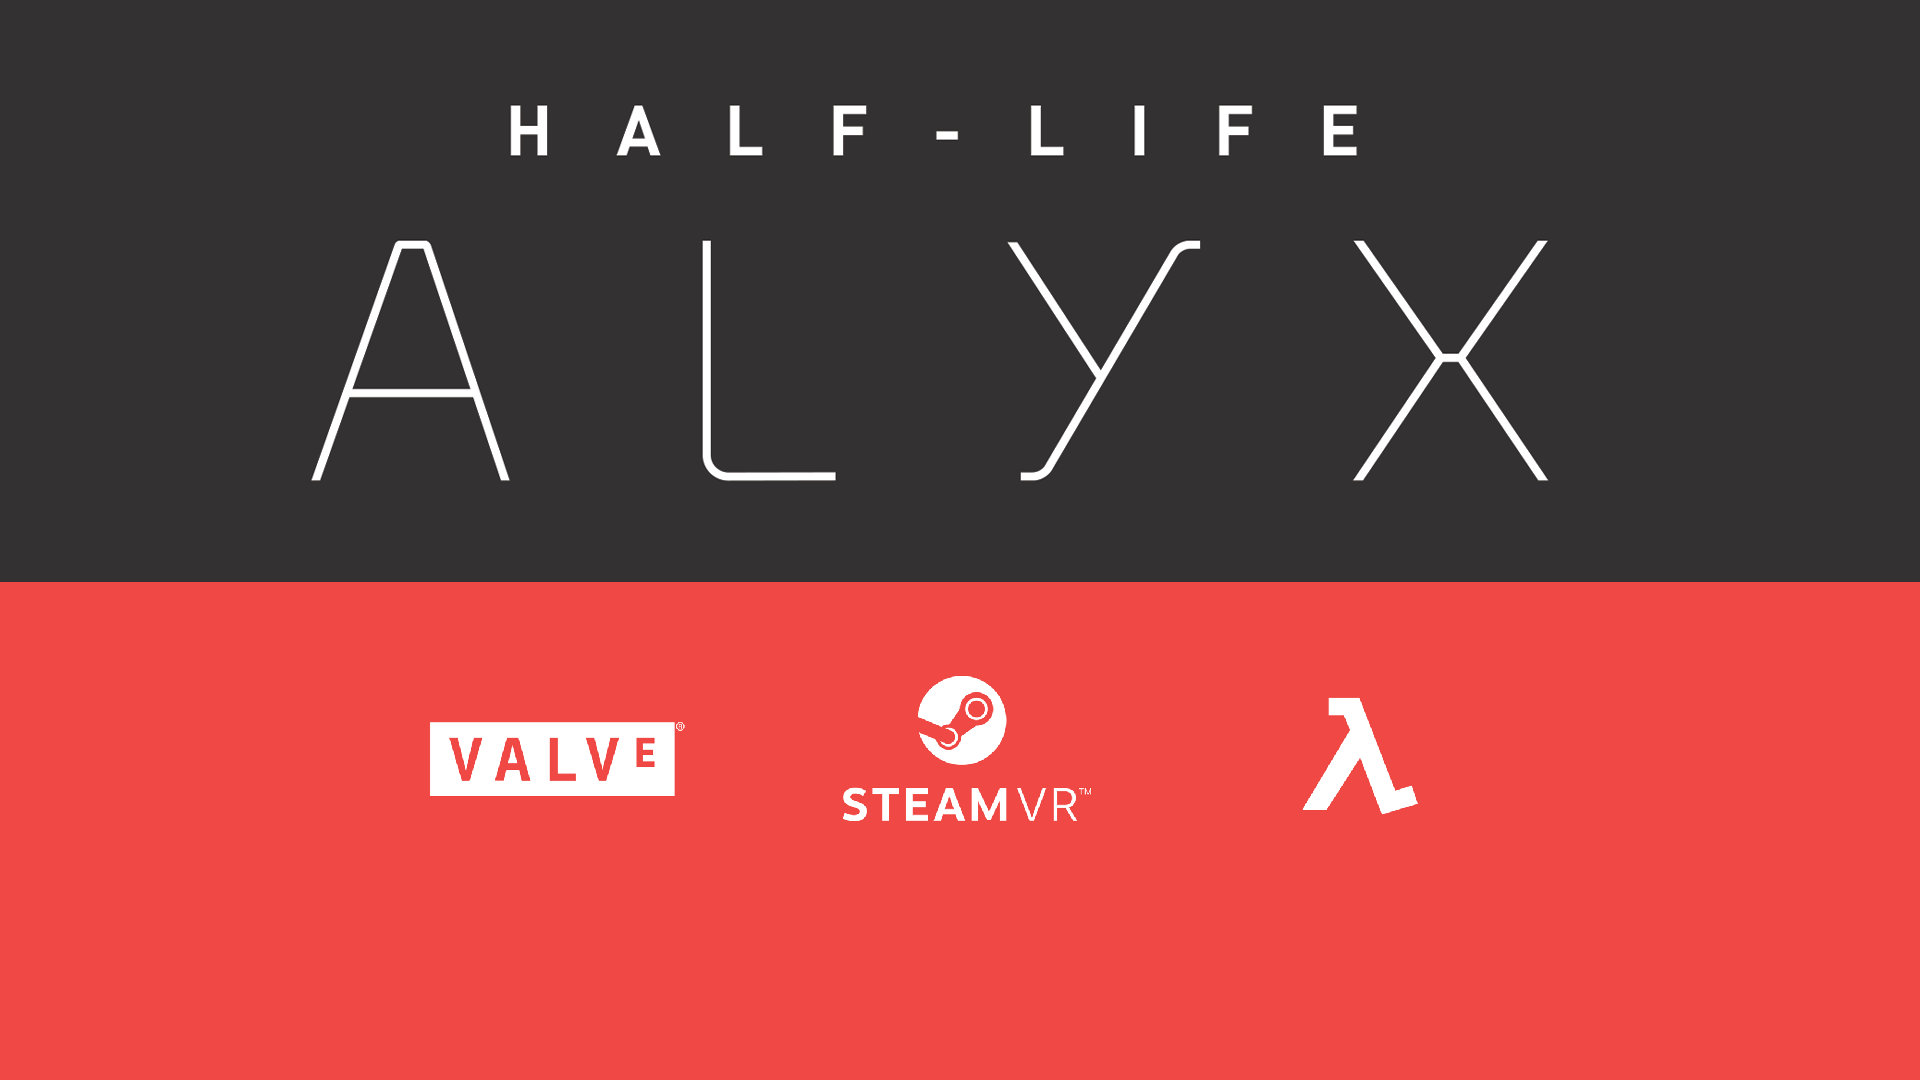 I just bought Oculus Quest for Half-Life: Alyx. Next week I will